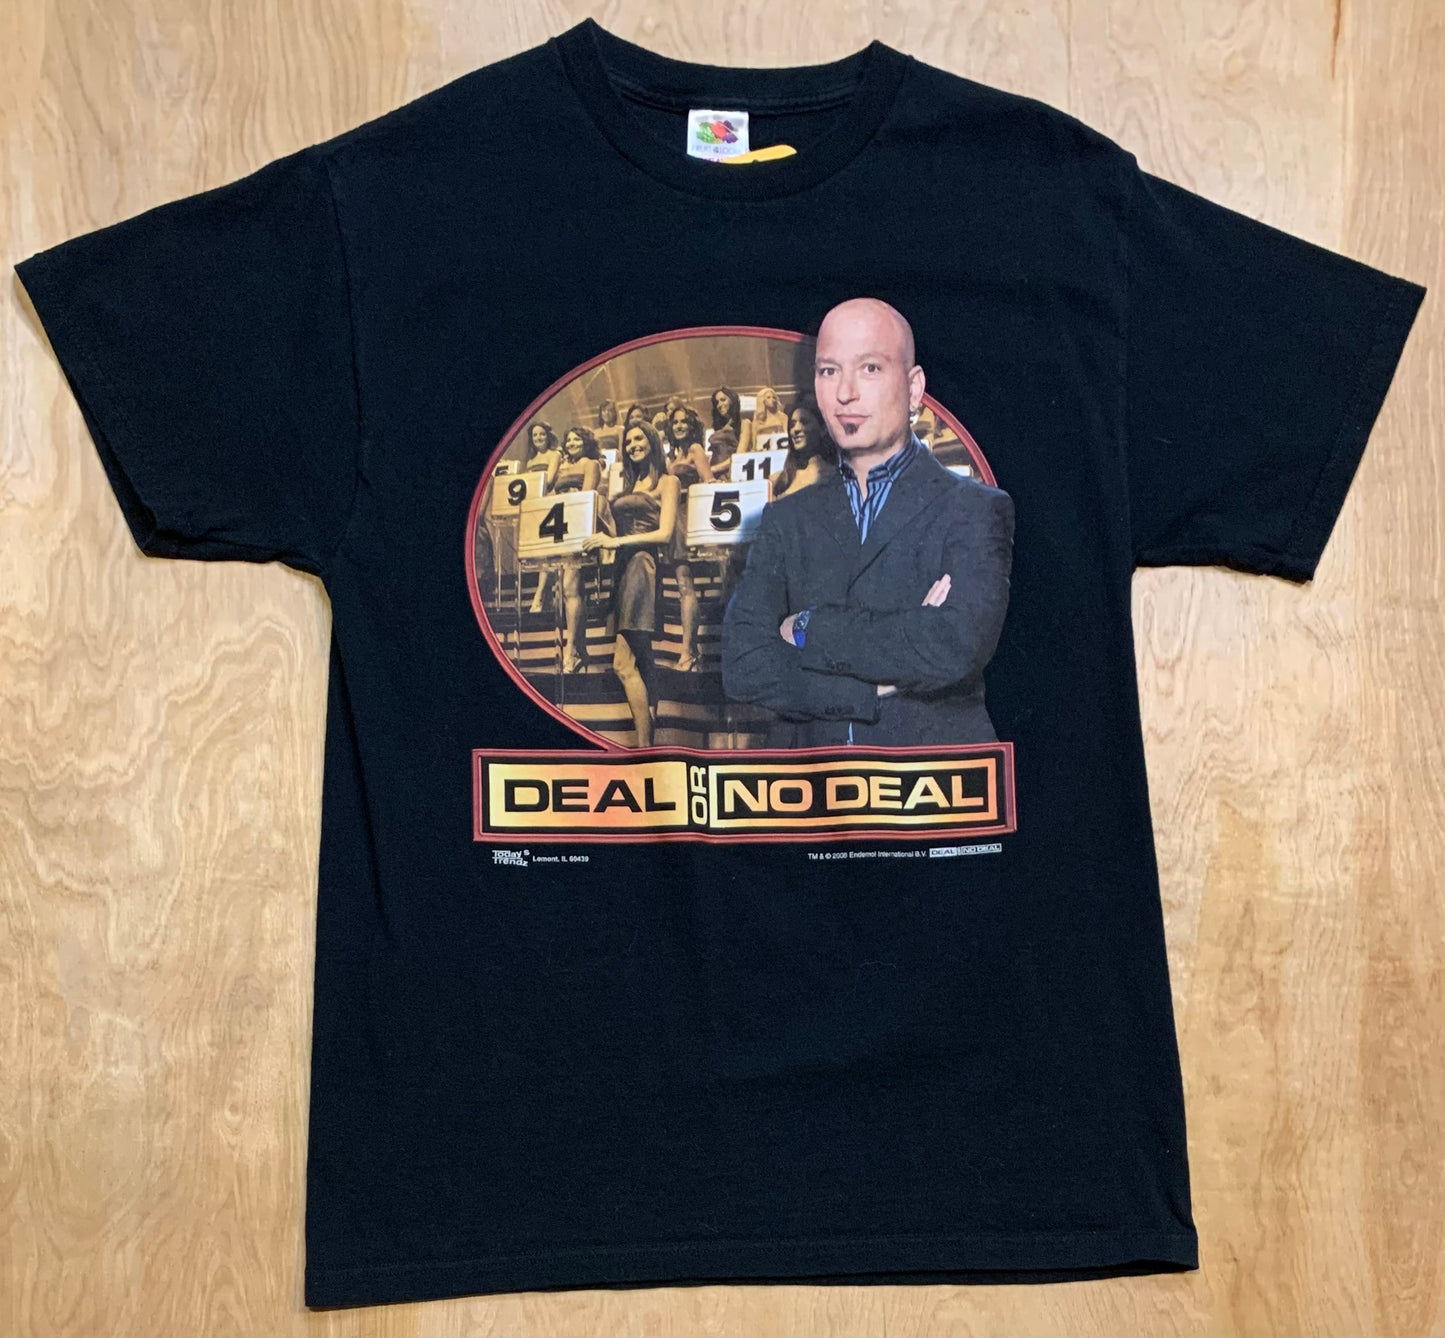 2006 Authentic Deal Or No Deal Promotional T-Shirt